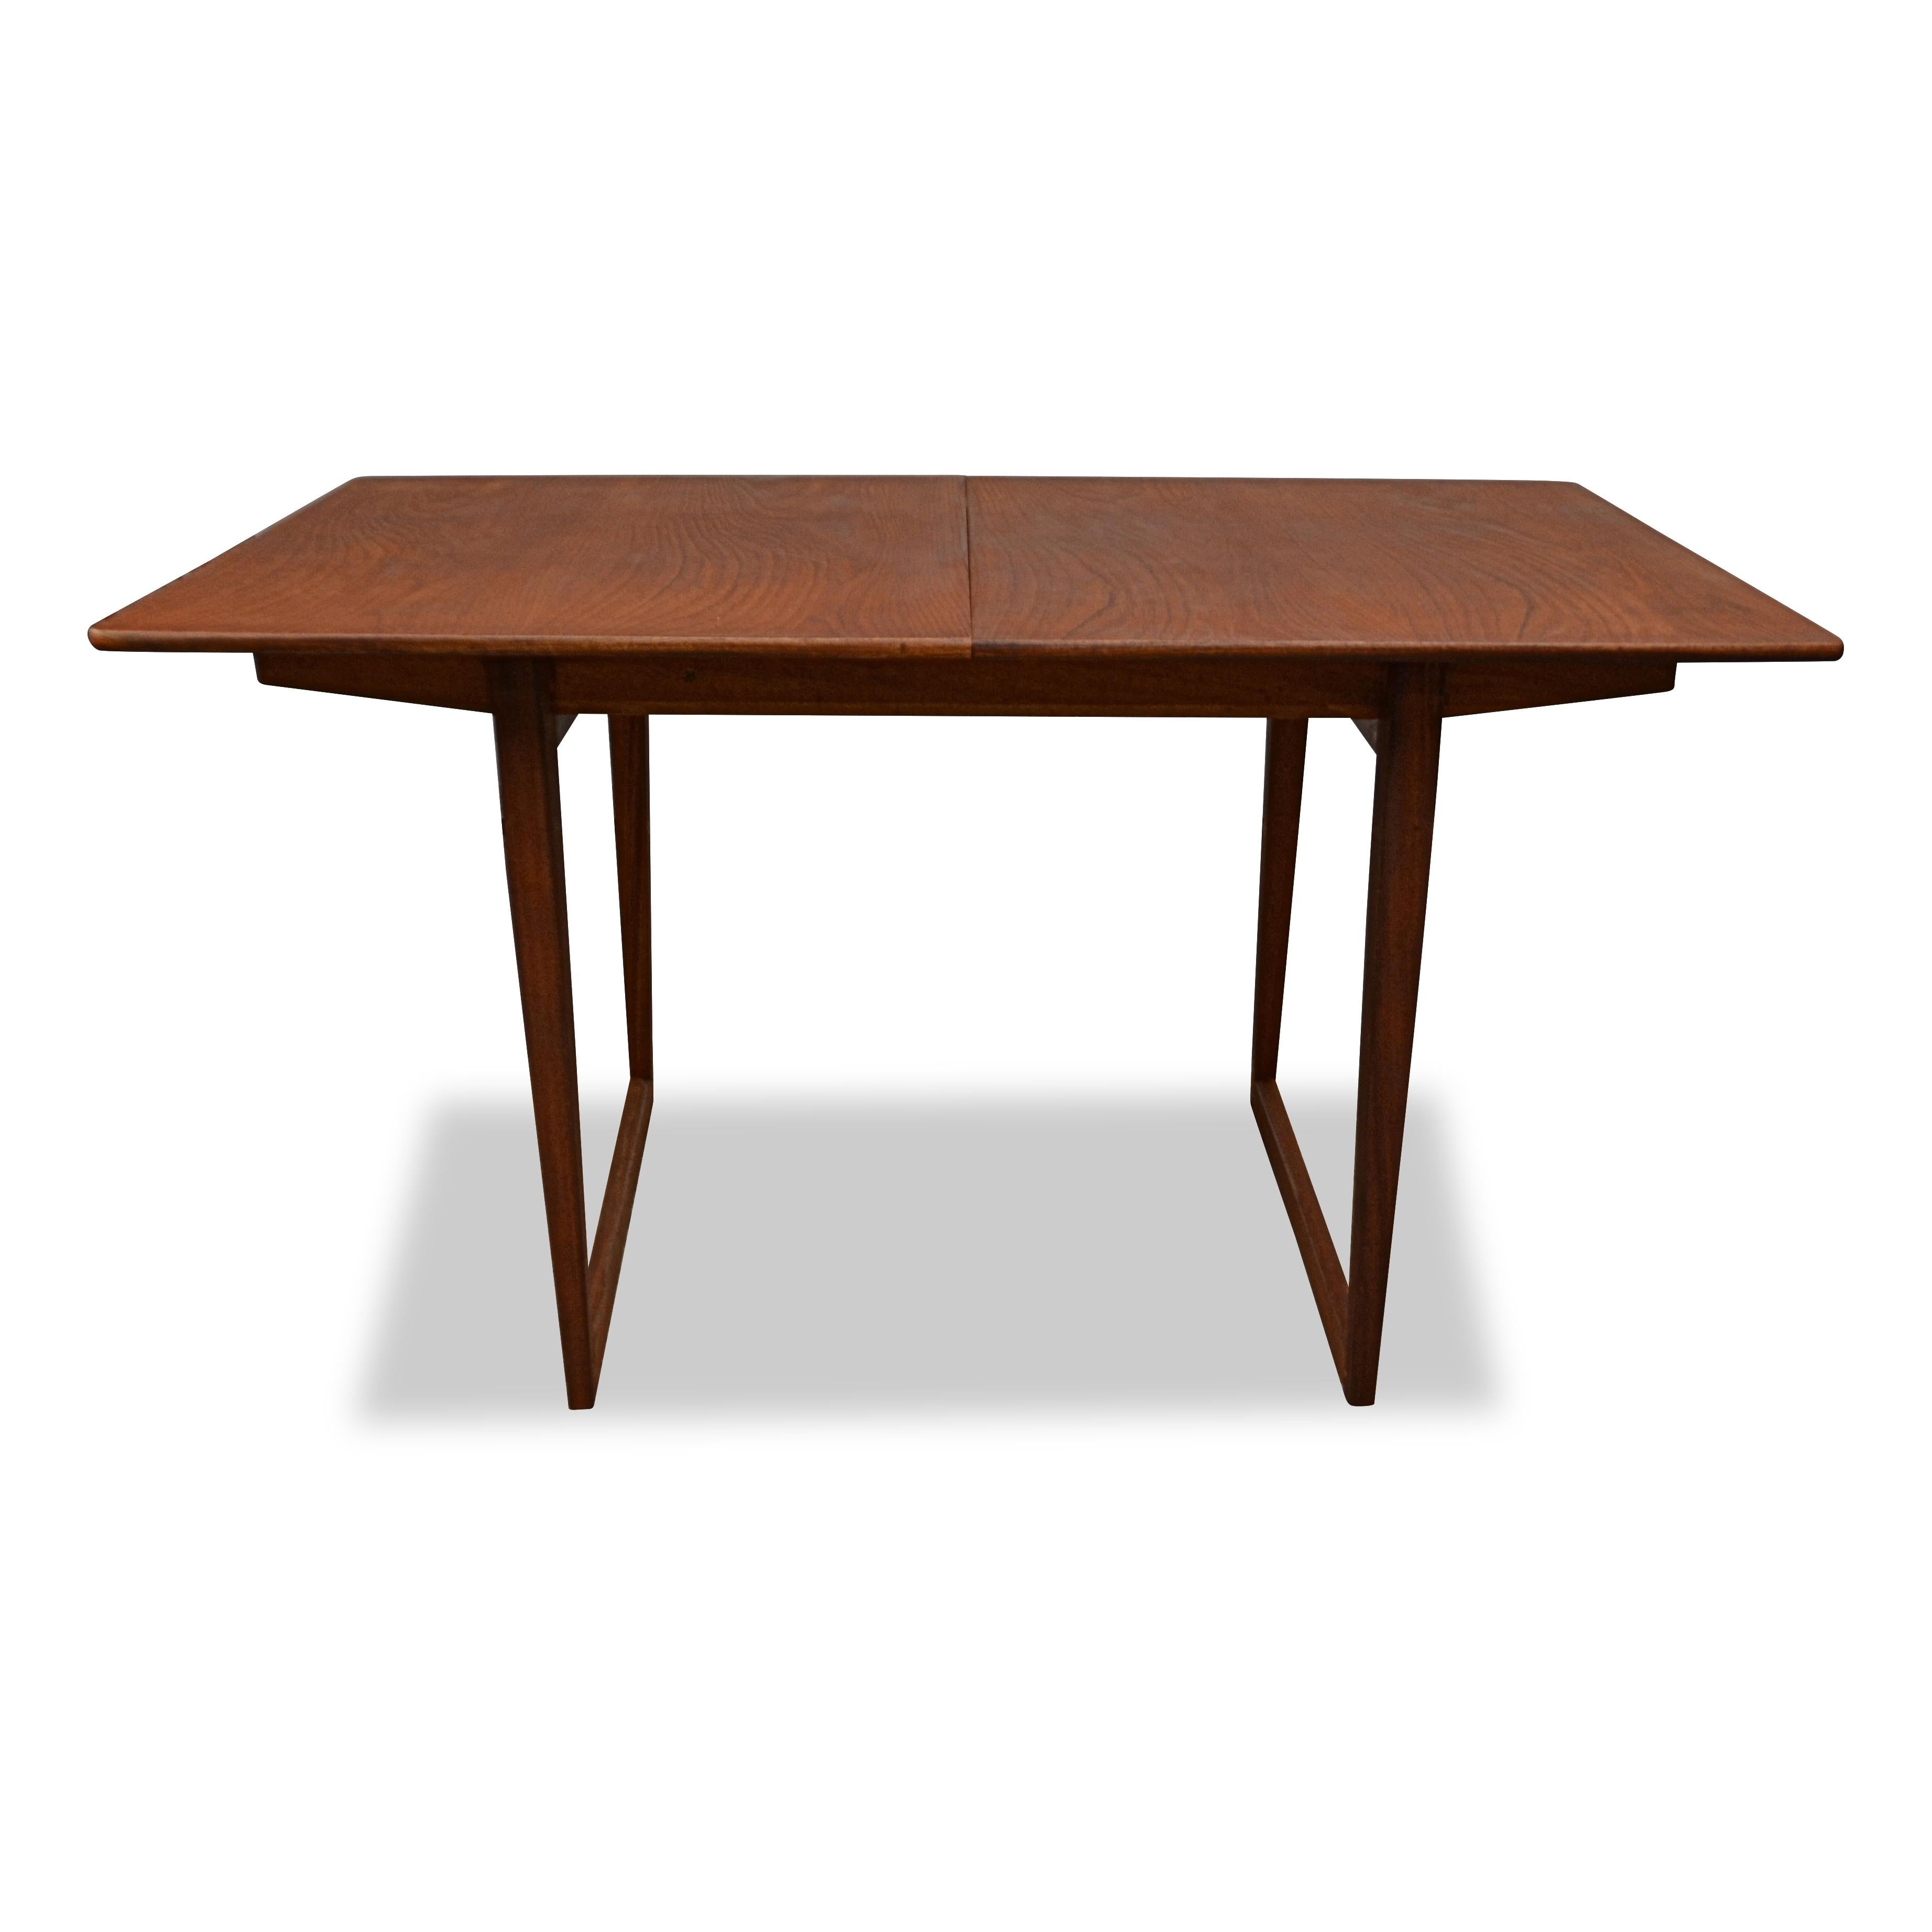 Stylish vintage Danish teak dining table by an unknown designer. This rare table features a beautiful sled base and a fold-out extension piece with brass hinges. The extension piece disappears under the tabletop when folded in. When extended you’ll